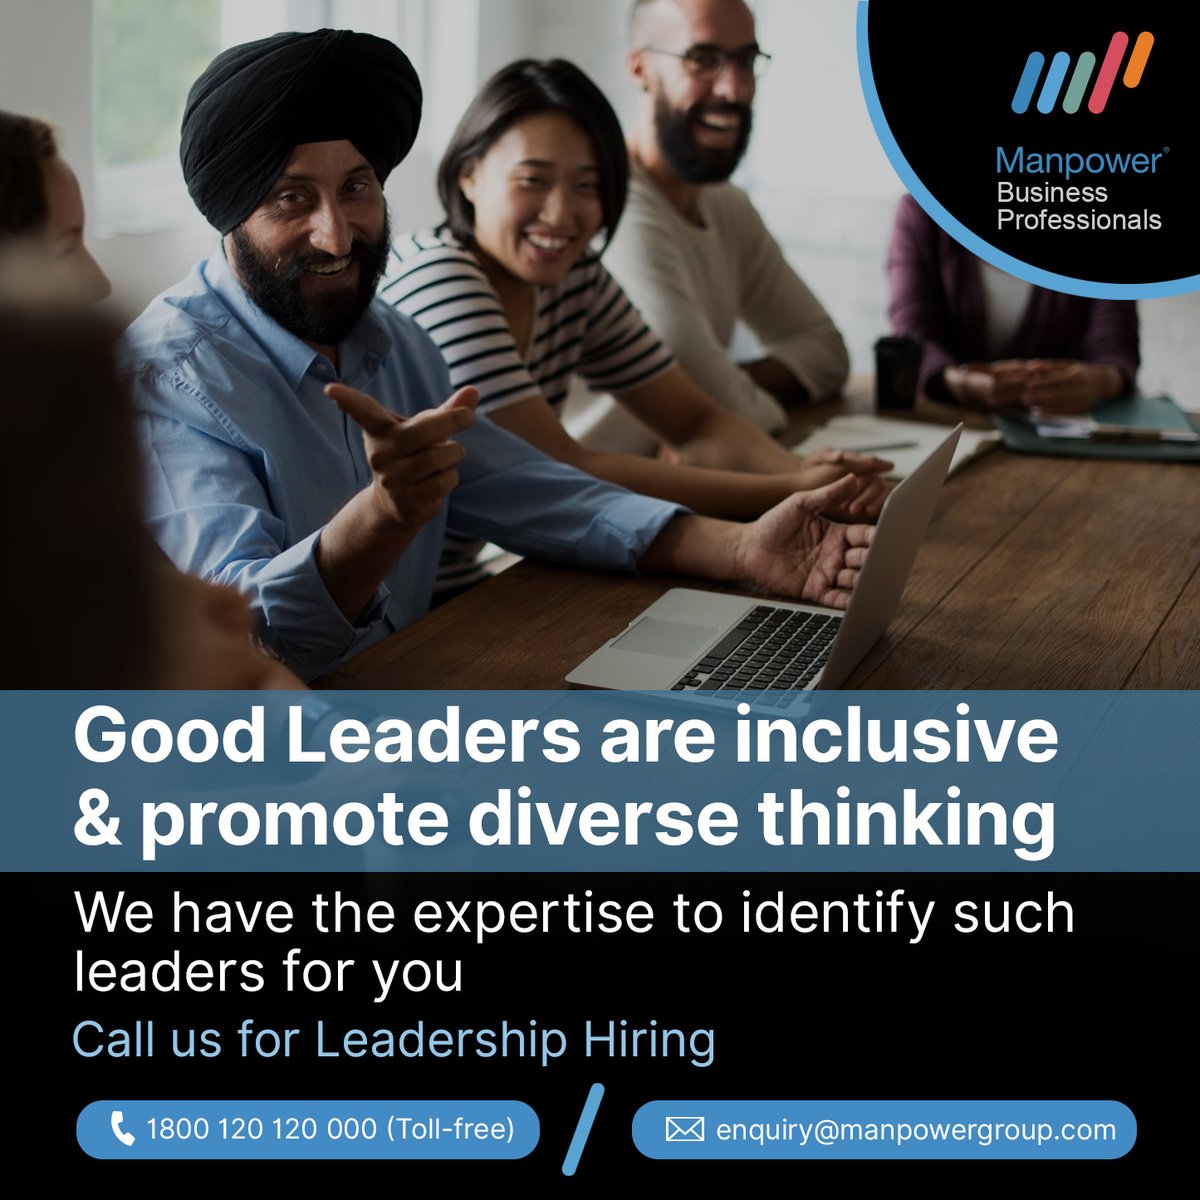 A #diverseworkforce has a 70% higher chance of gaining #marketshare for a brand.

Wondering how you can achieve the same? Begin by assembling a team of inclusive & diverse leaders.

Connect with Manpower Business Professionals
Learn more: lnkd.in/dHvEieqw